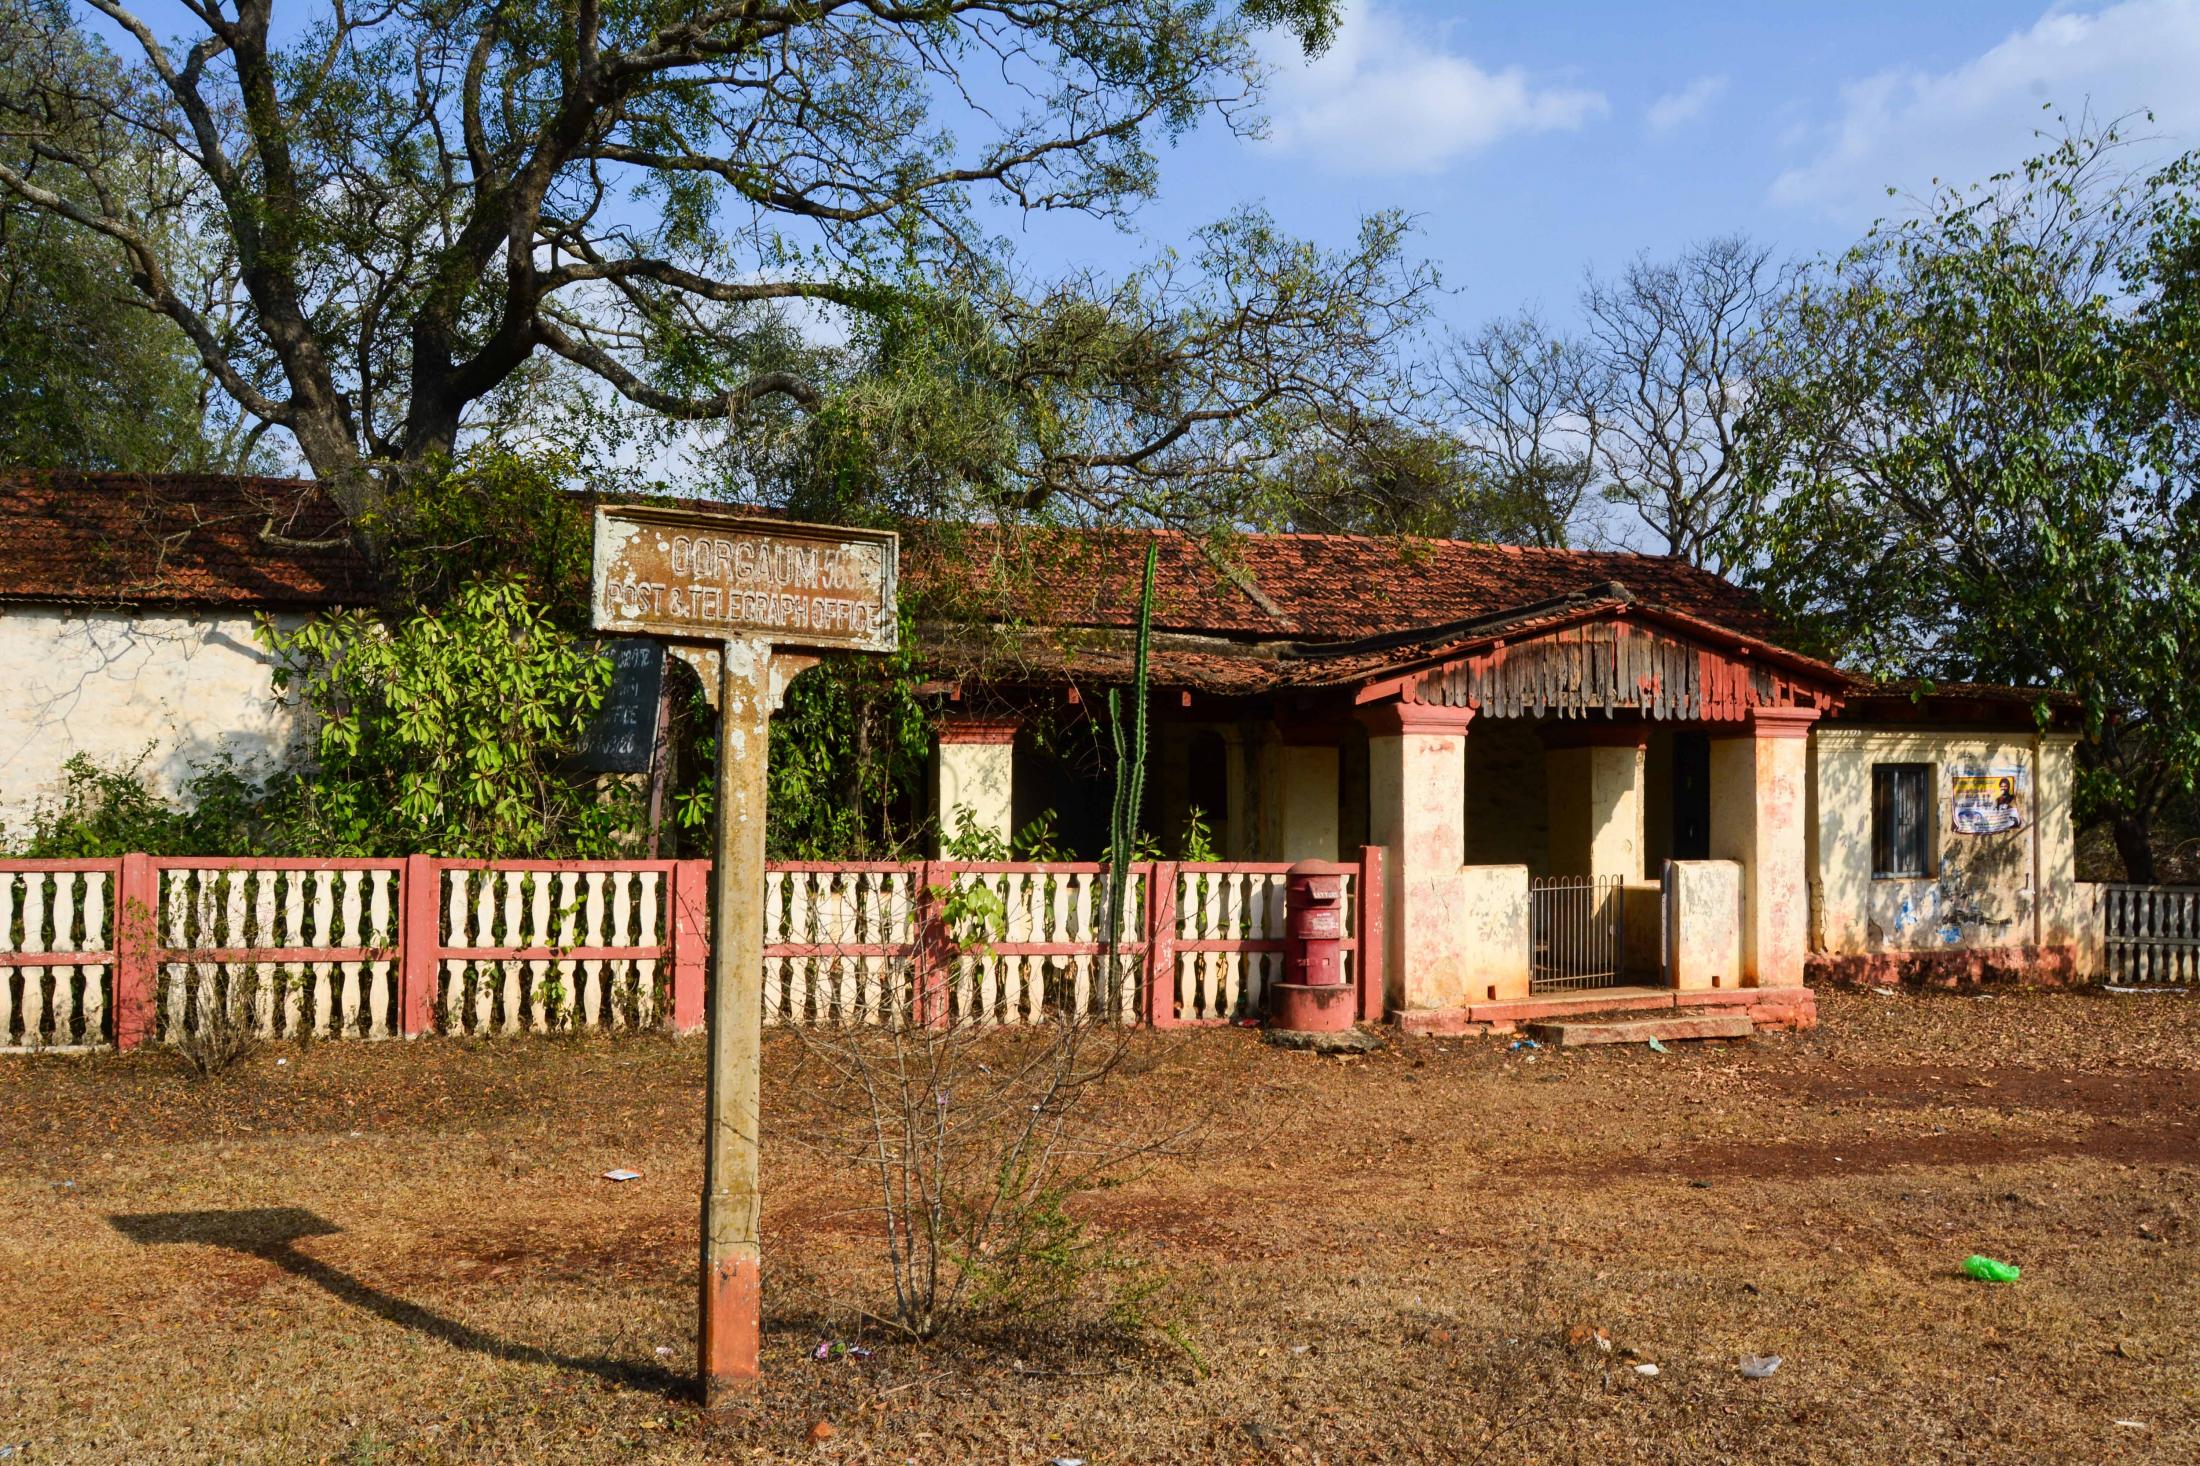 The Oorgam post office is one of the many ruins of this town.